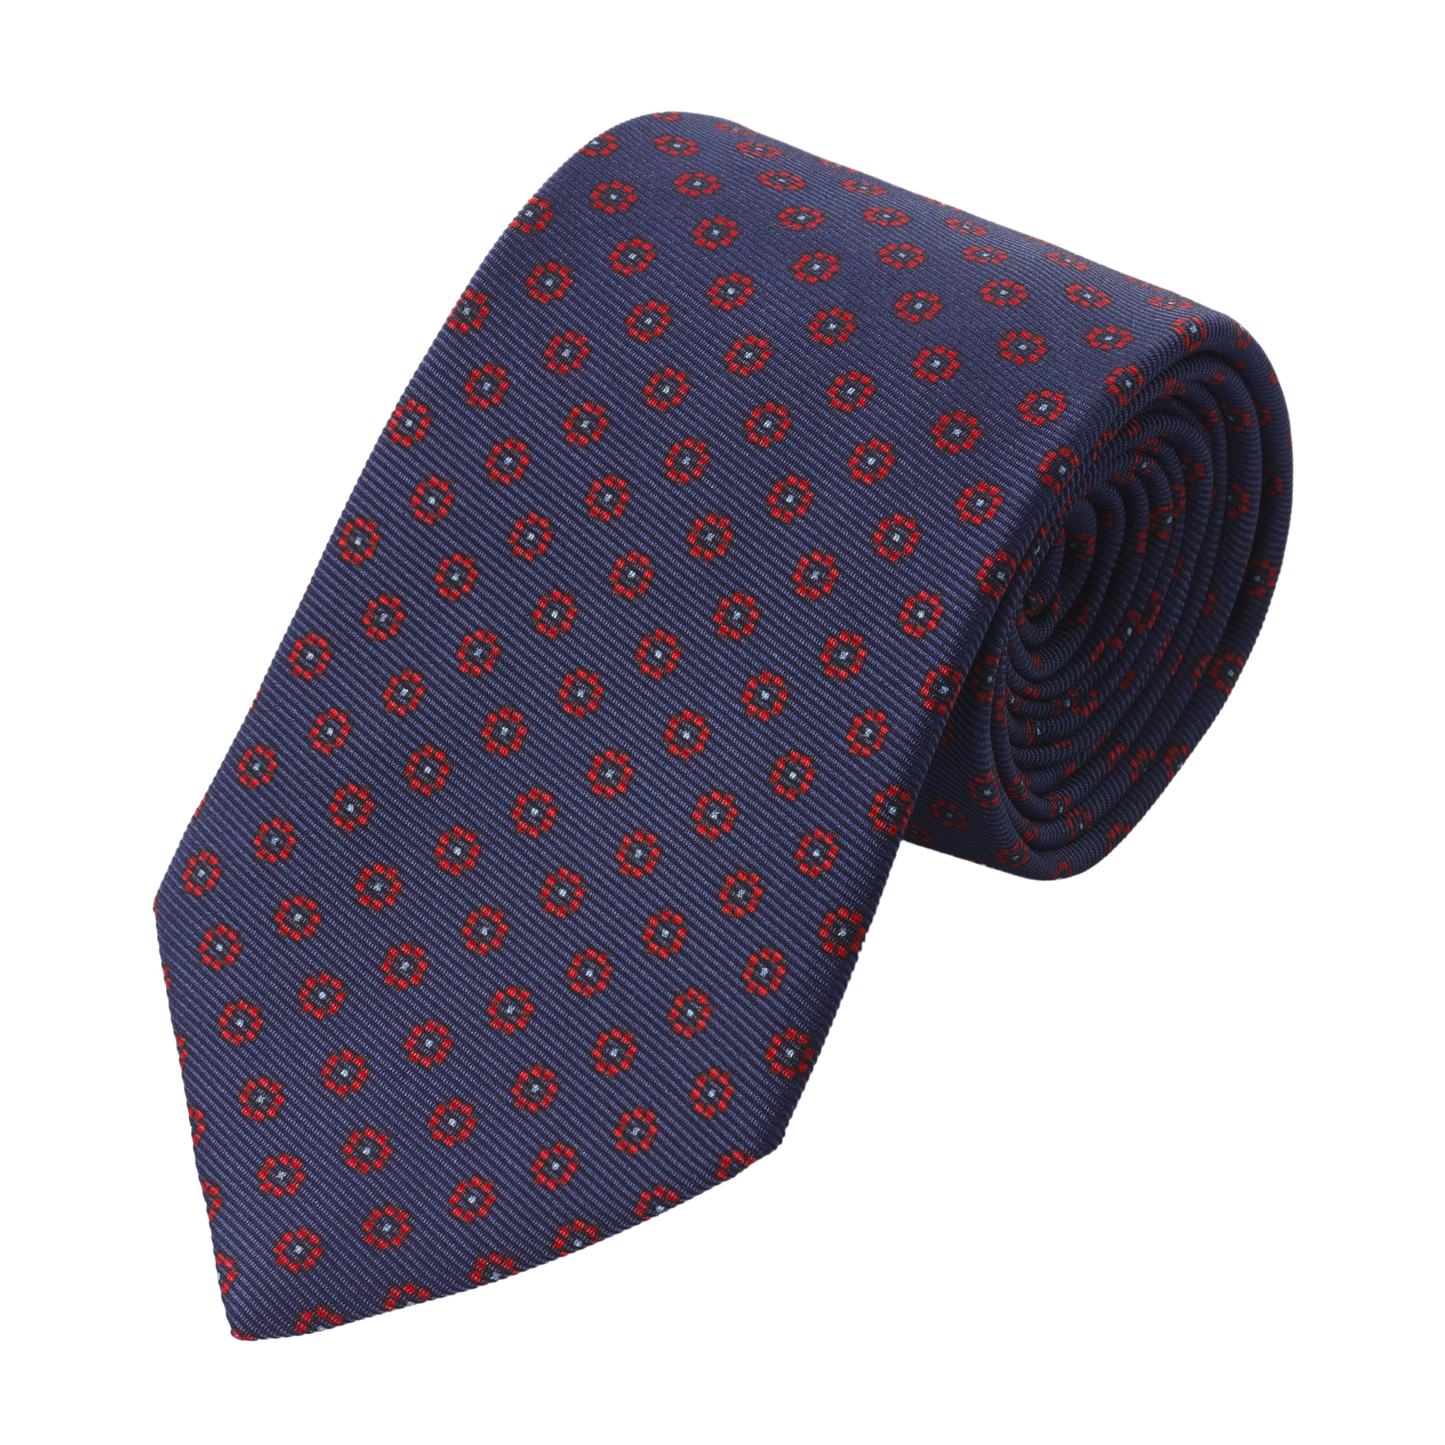 Woven Silk Lined Tie with Flower Design